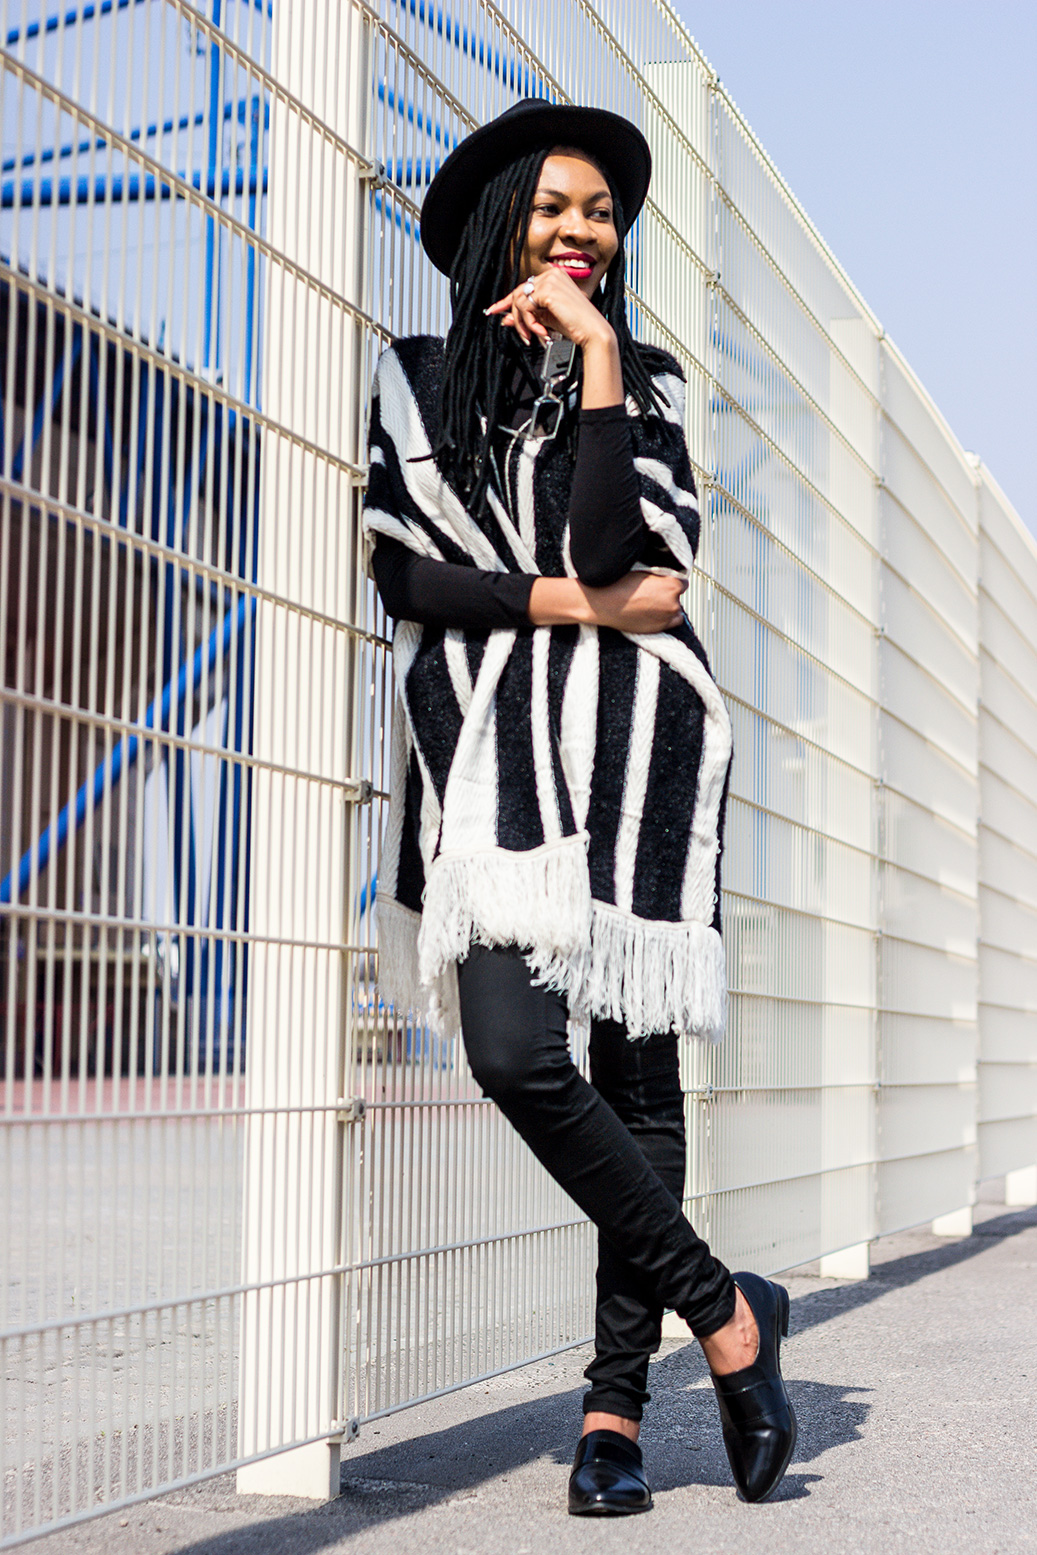 chic way to wear tassel kimono outfit